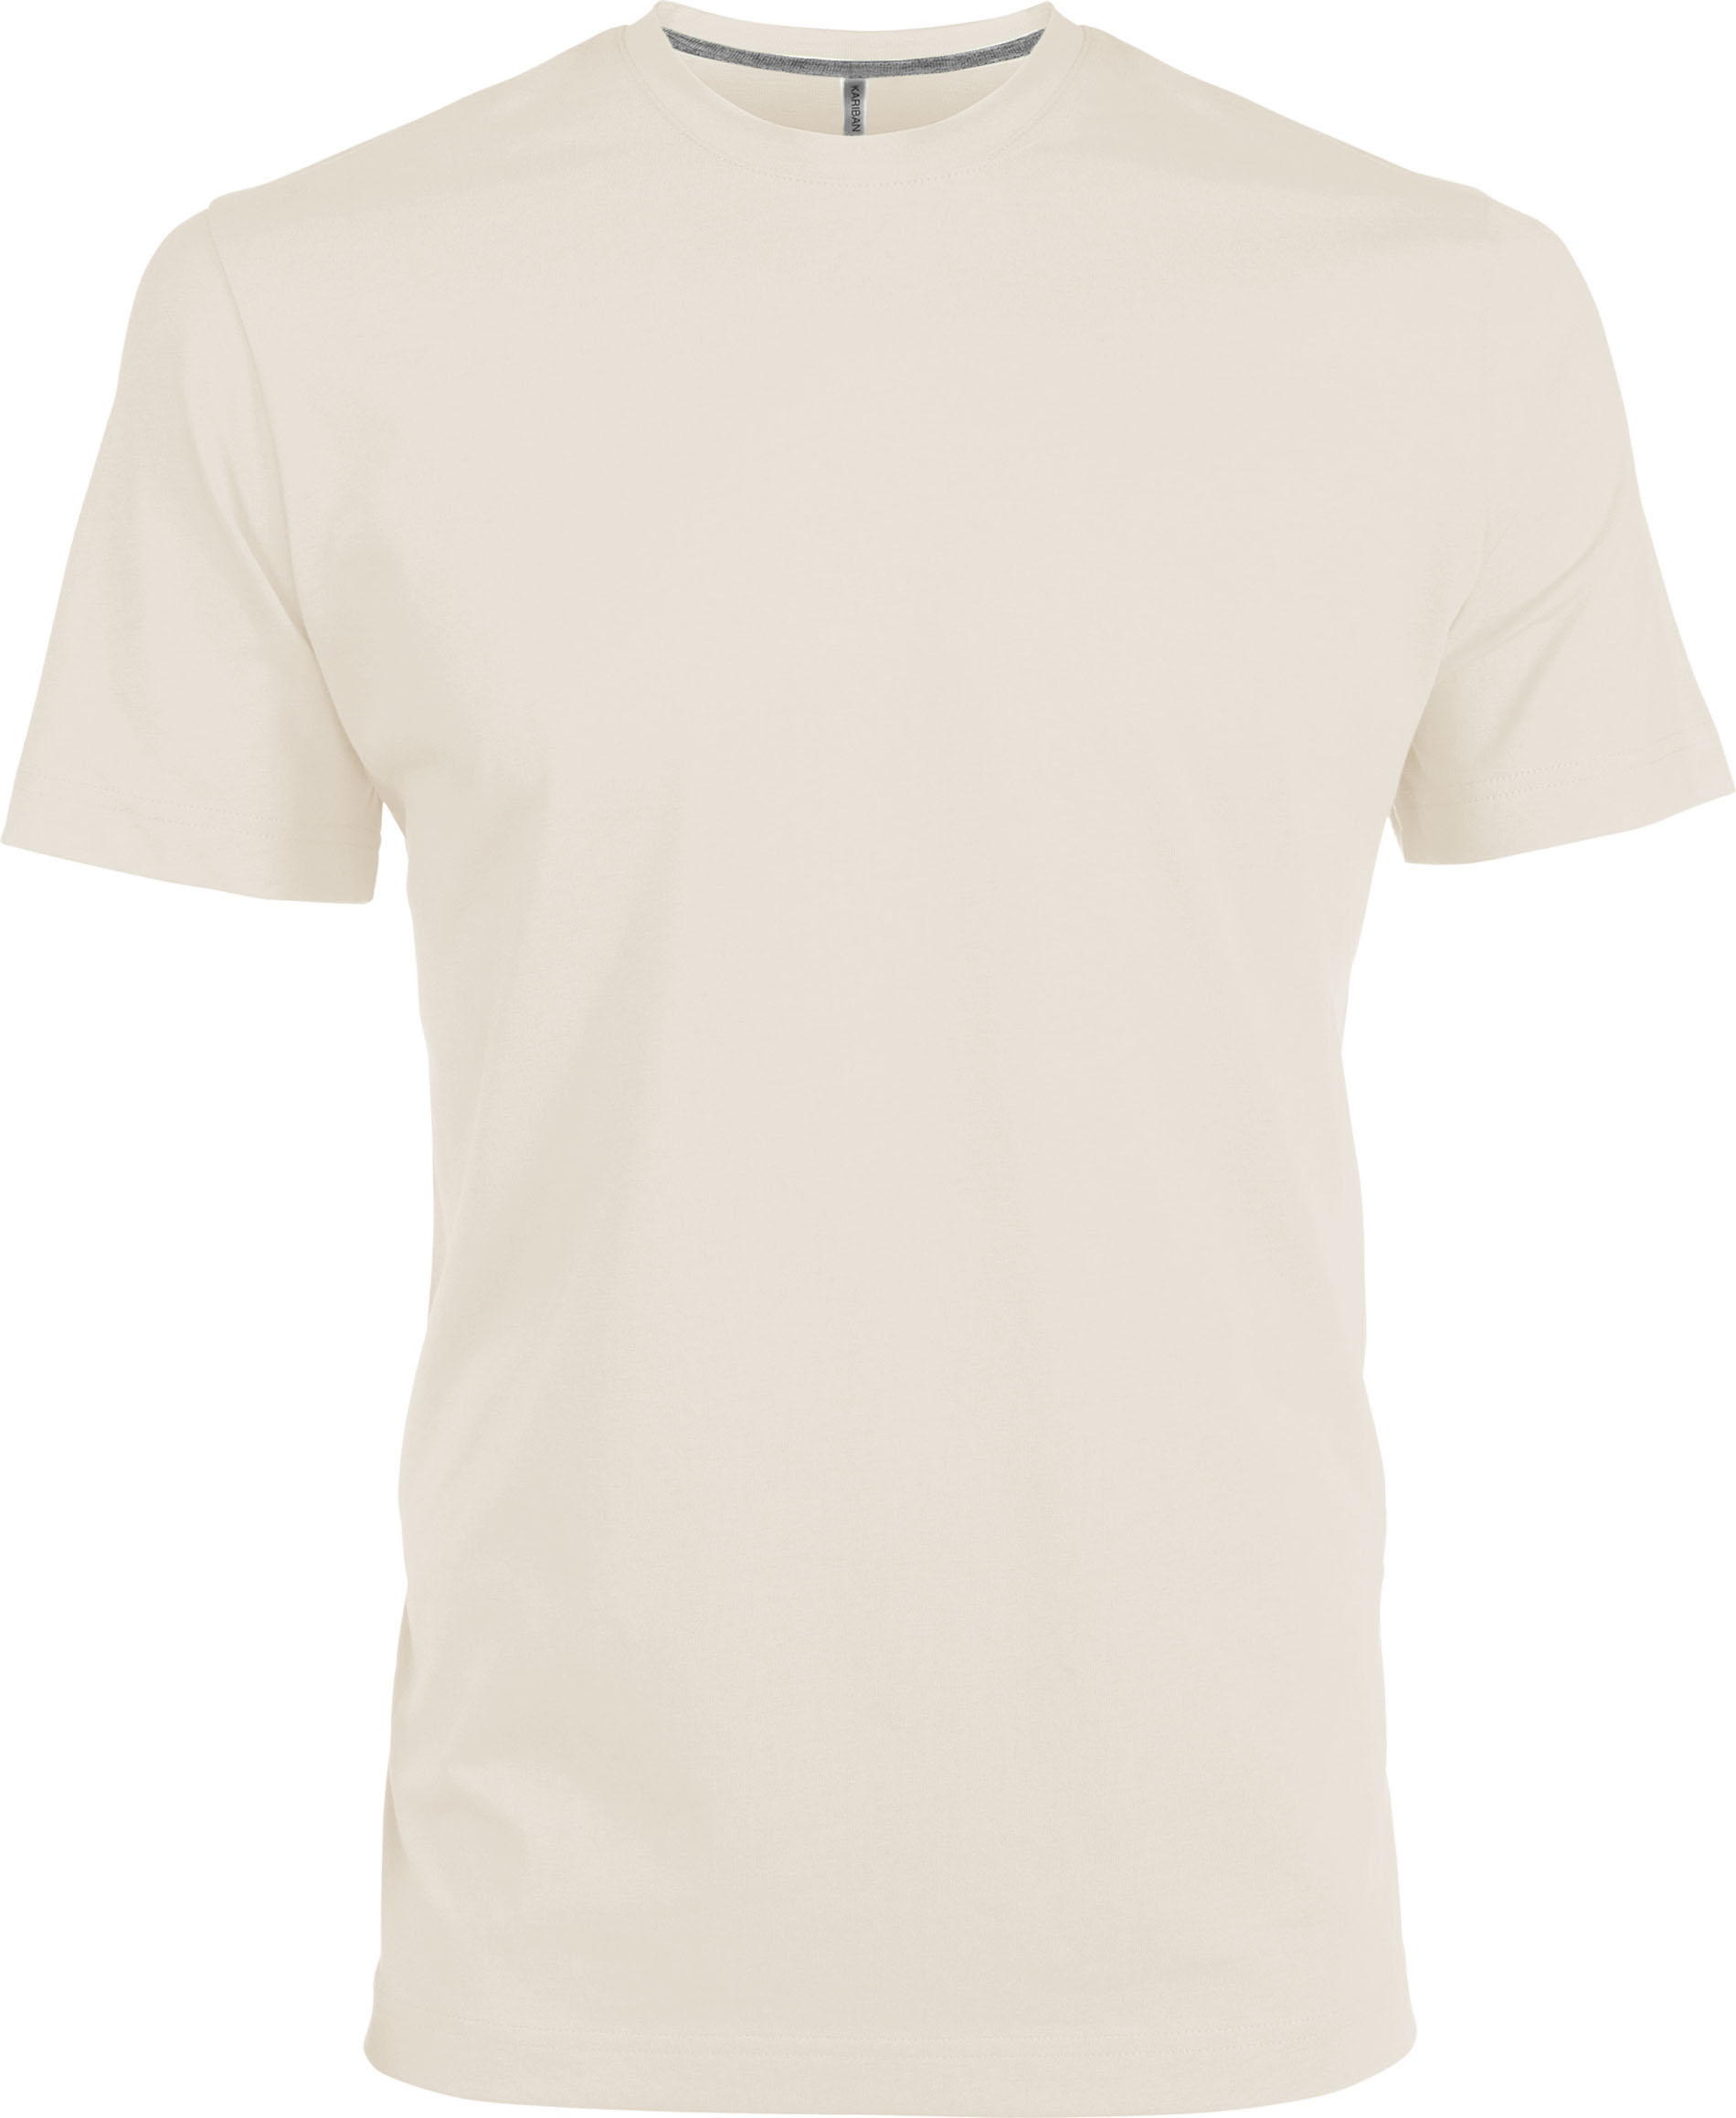 Tee-shirt Homme Personnalisable8